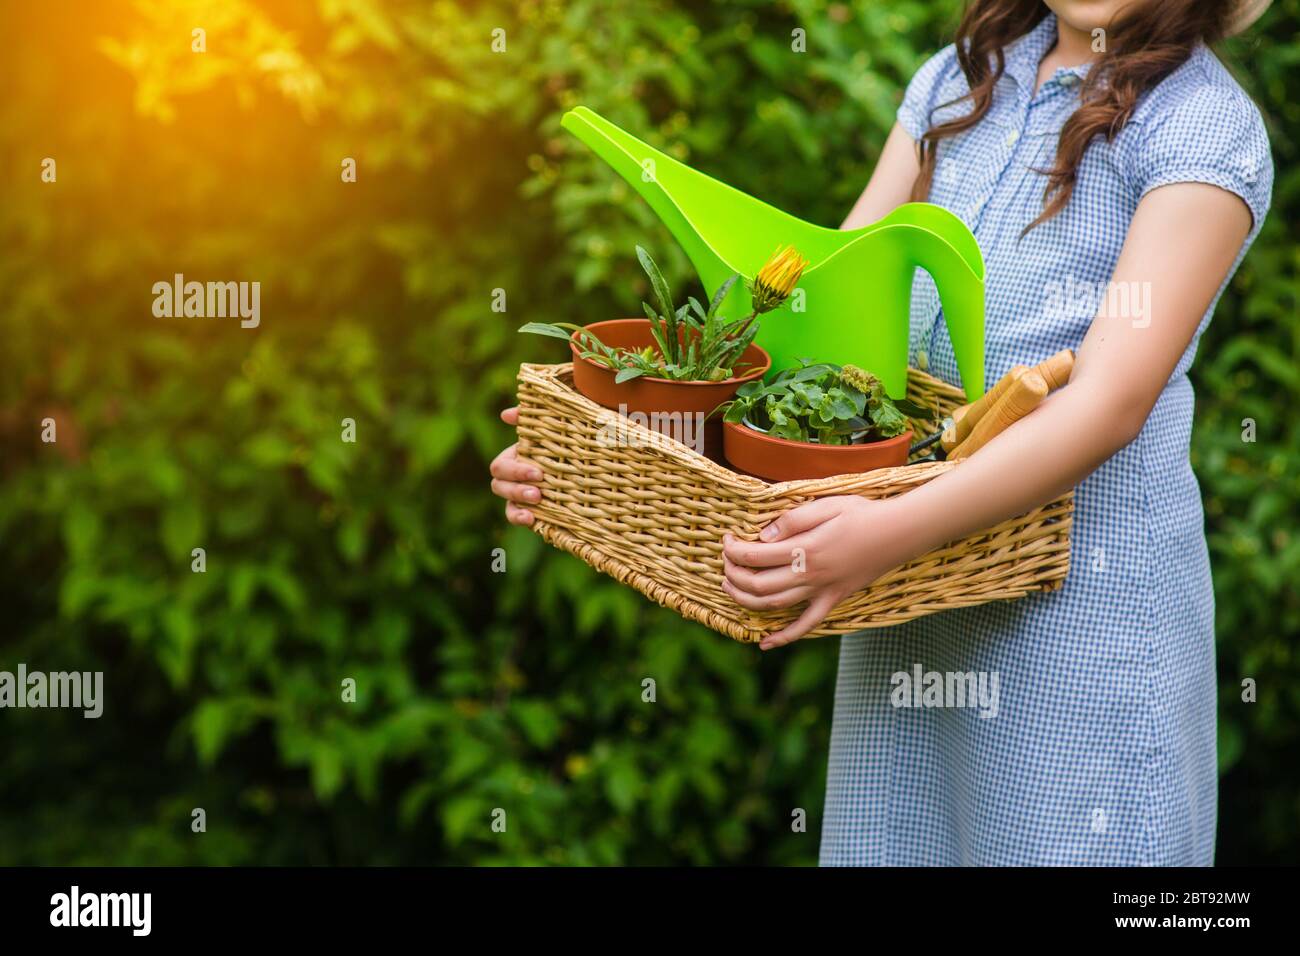 smiling cute girl gardener holding basket and horticultural tools in garden on sunny day. Summer activities Stock Photo